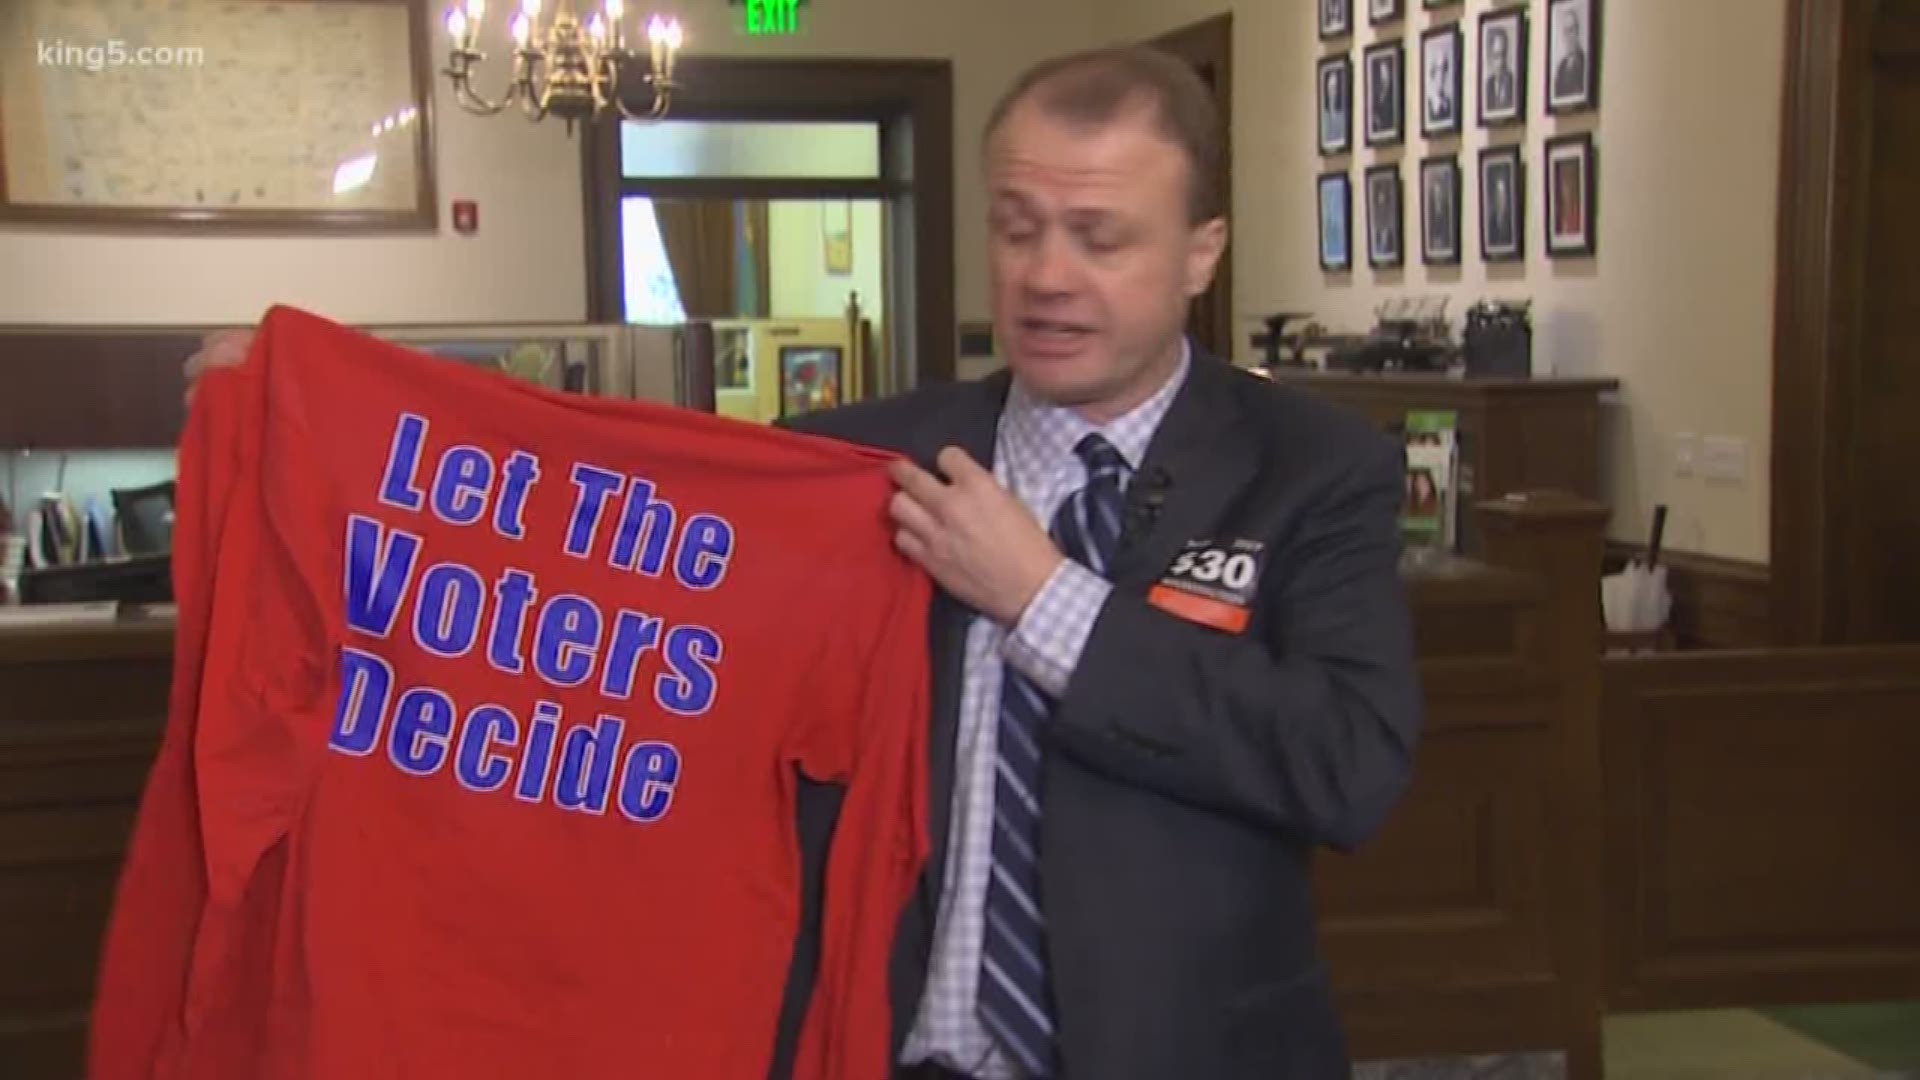 Tim Eyman, a career anti-tax initiative promoter, formally announced his entry into Washington’s 2020 governor’s race.